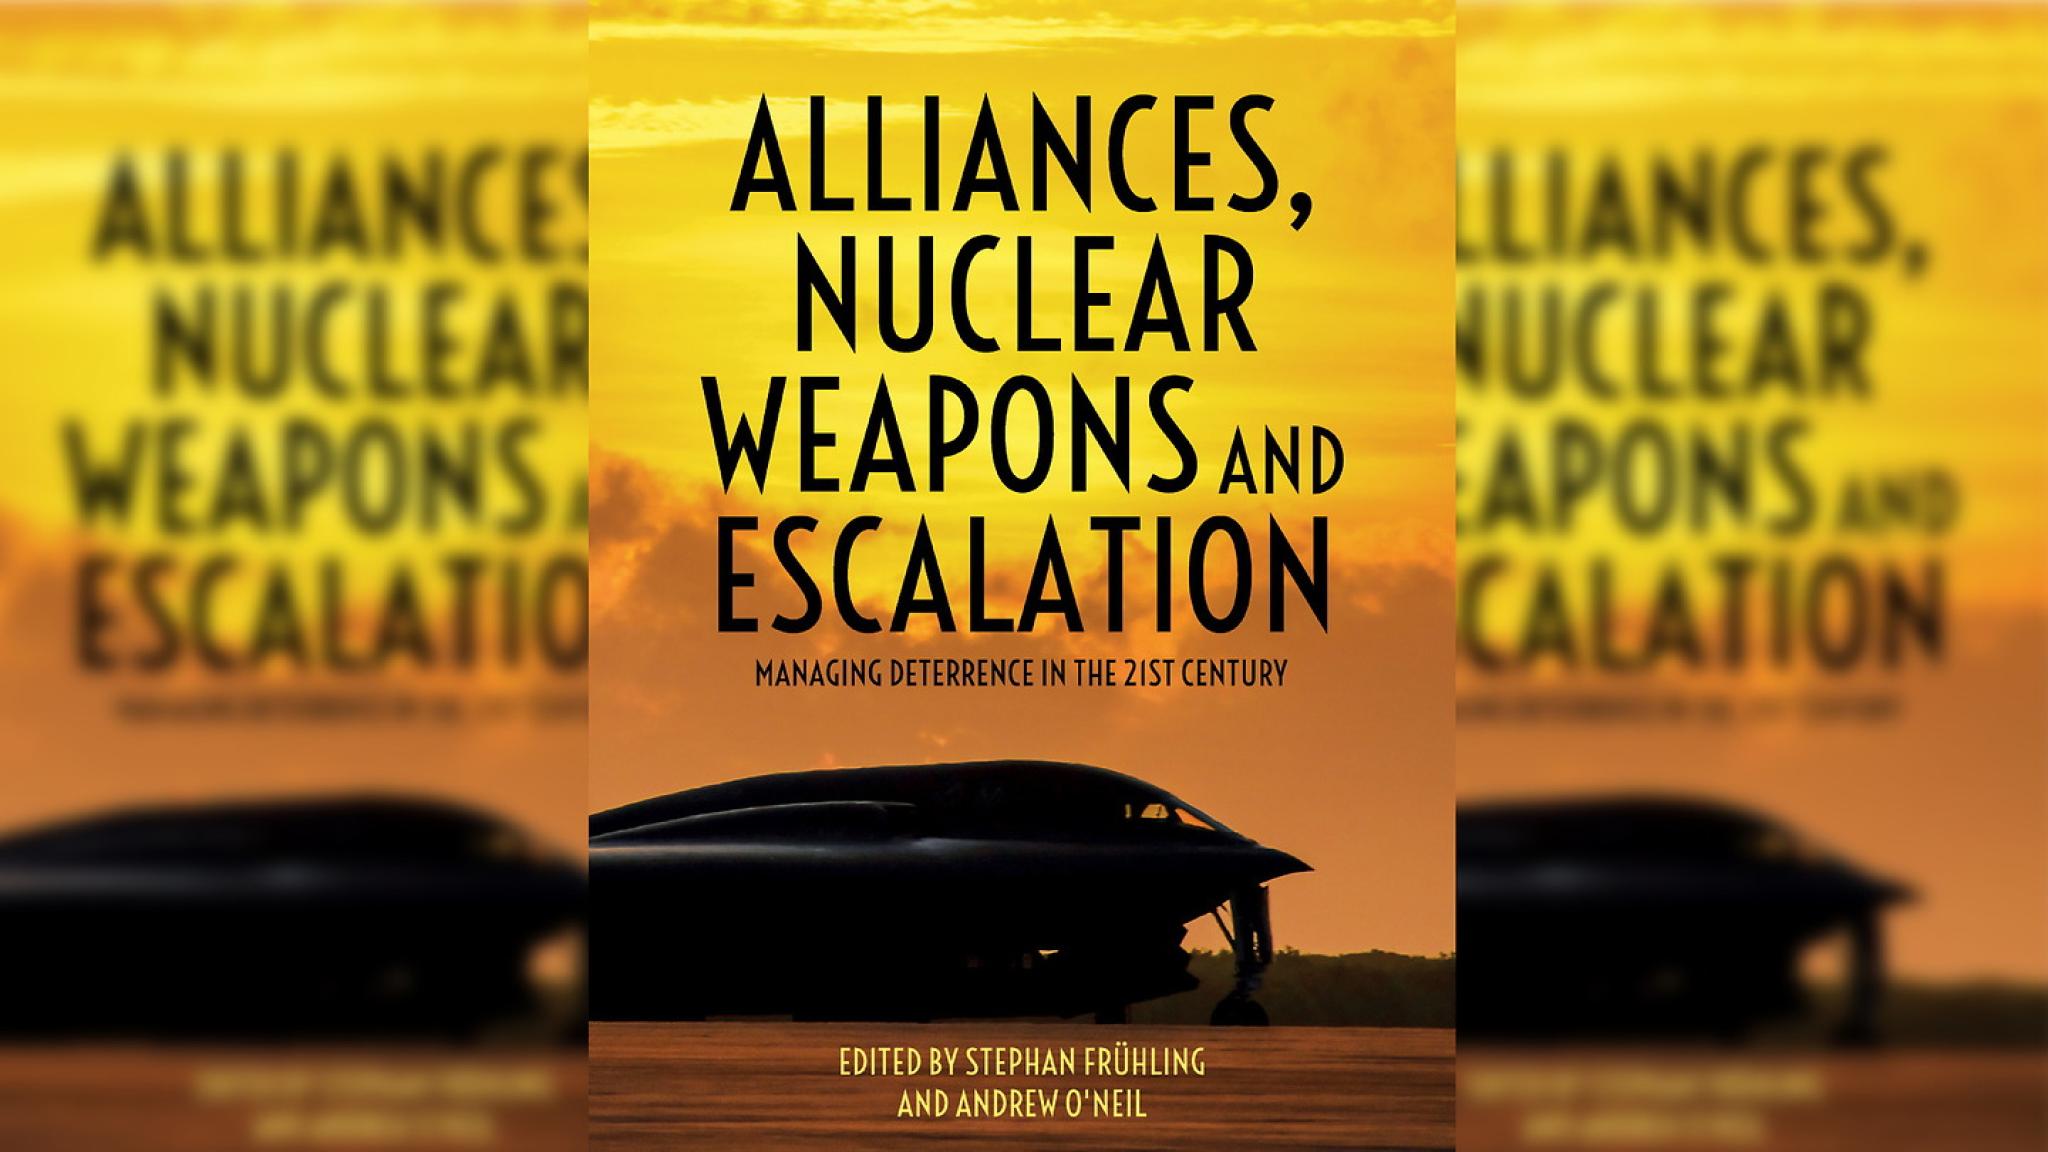 Alliances, Nuclear Weapons and Escalation-01.jpg